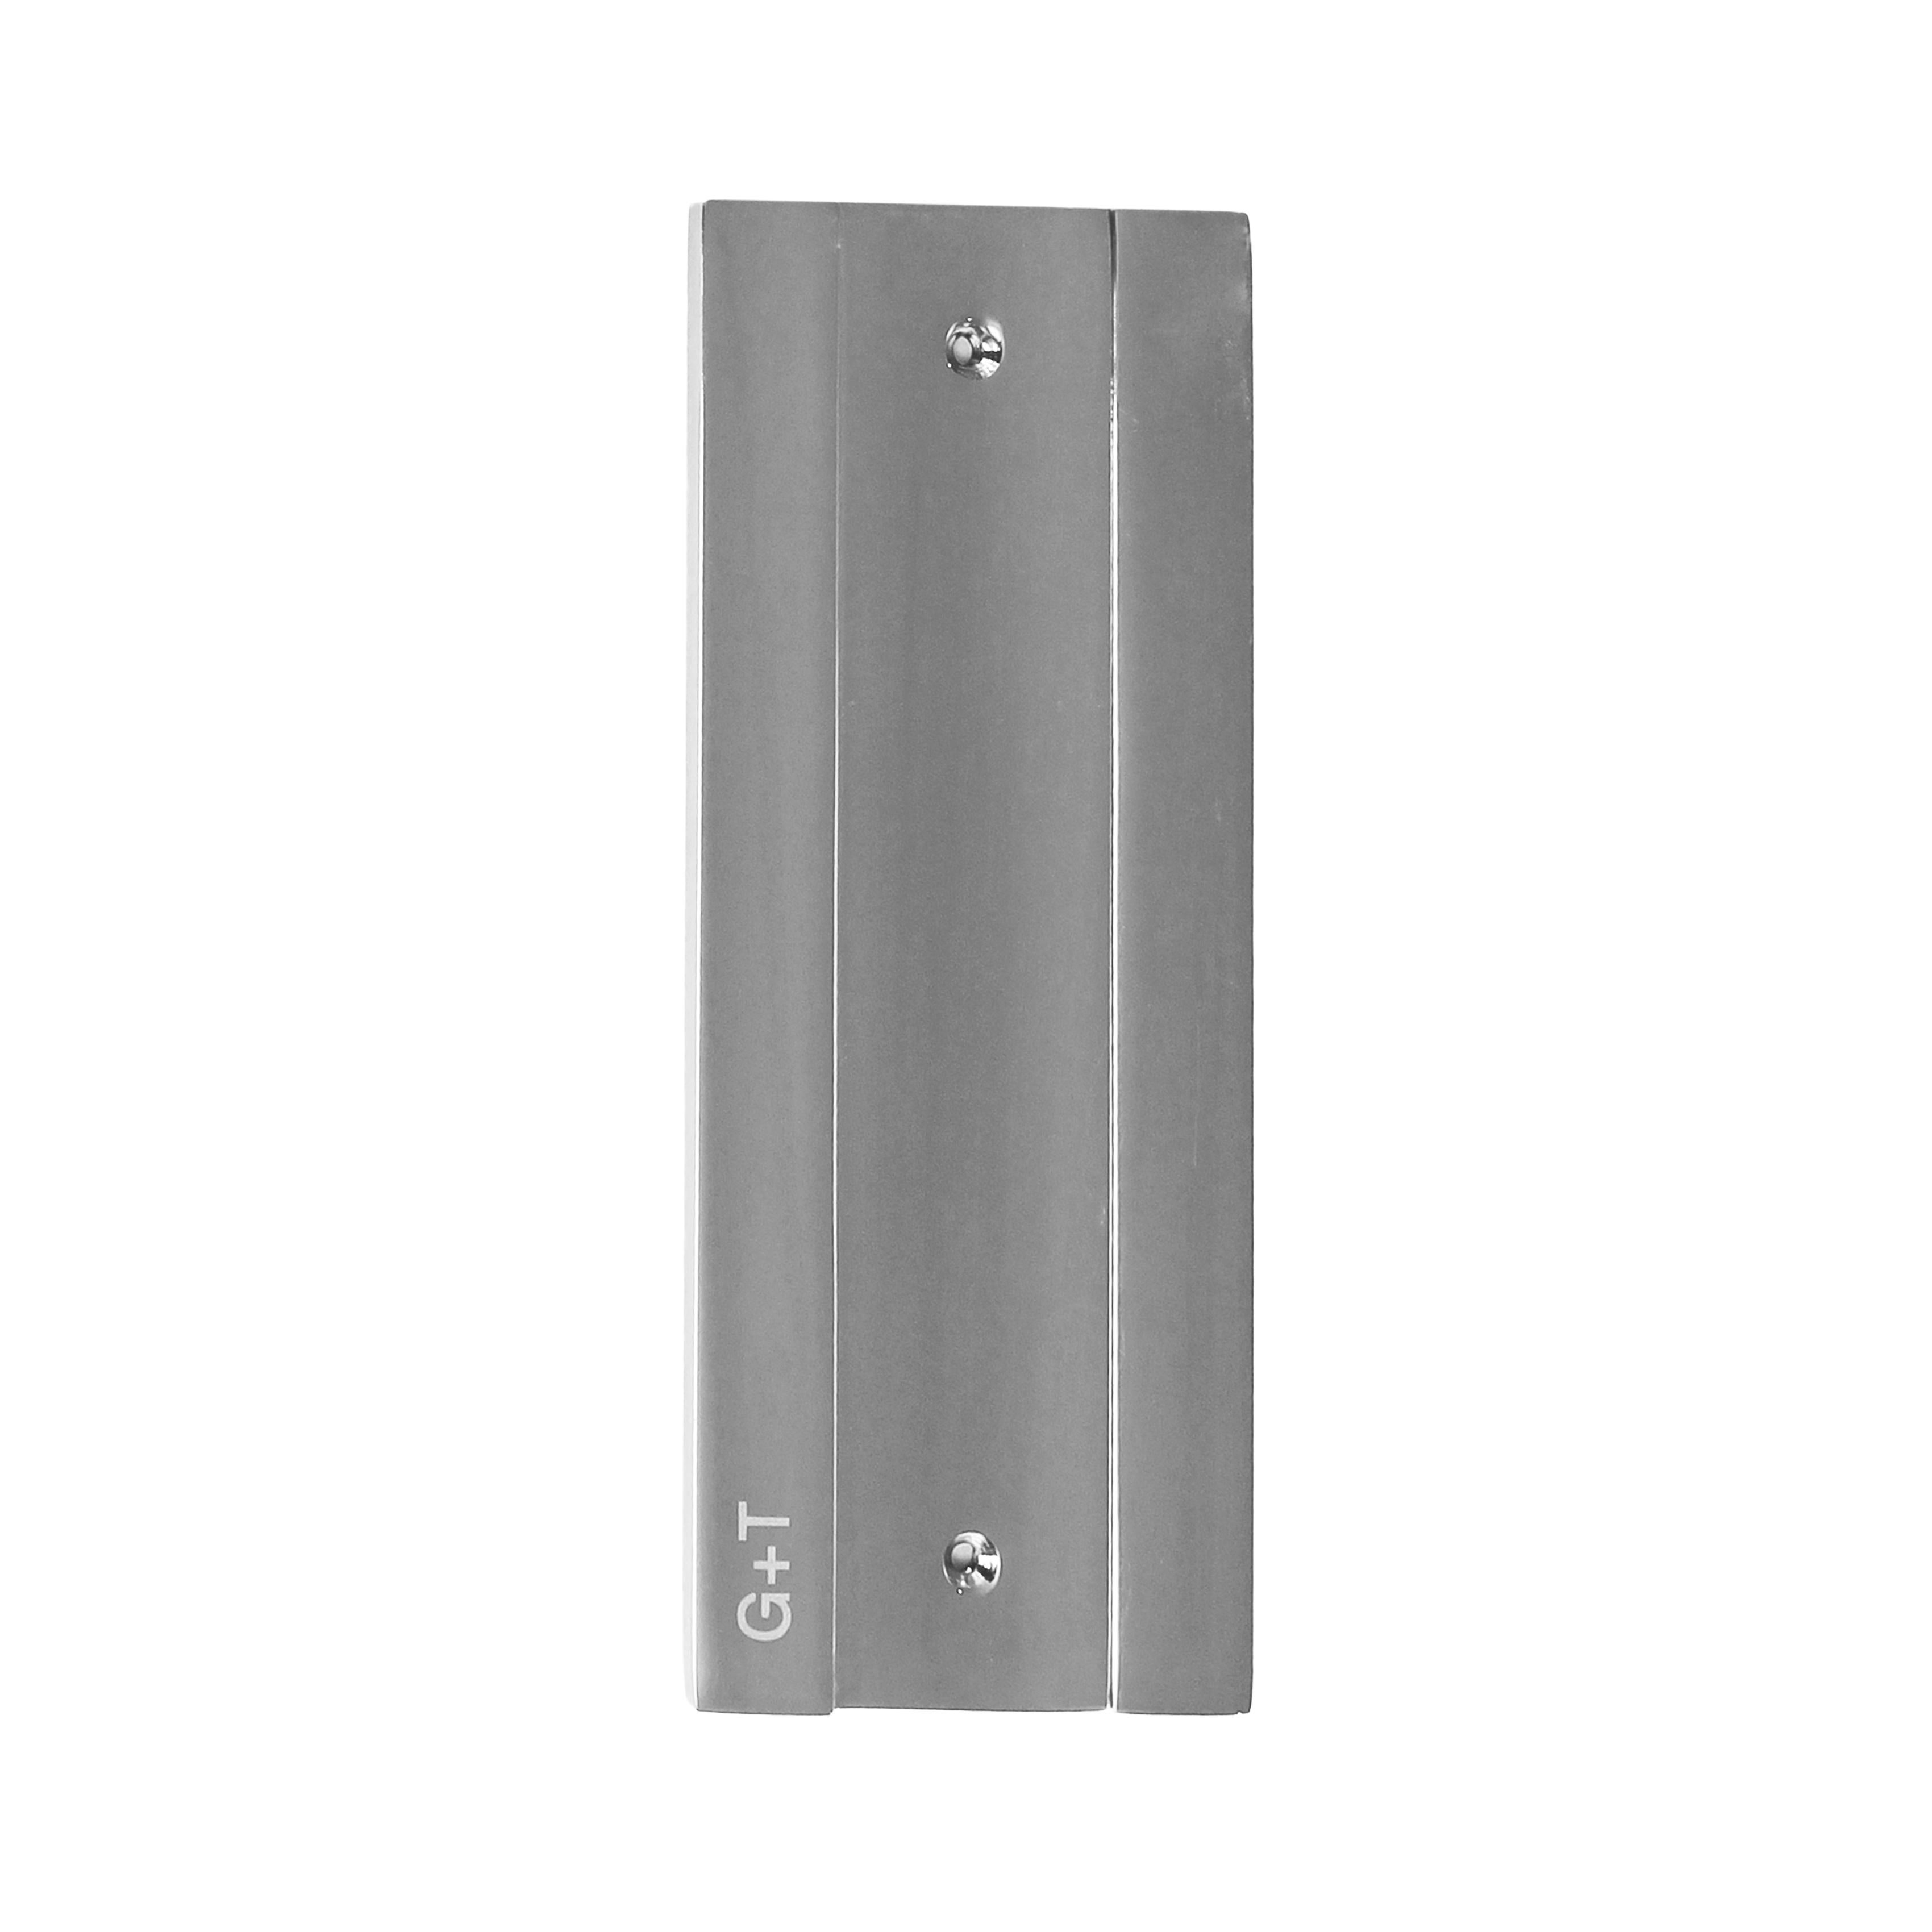 G+T Battery Accessory, Metal Plate for Wall in Polished Nickel